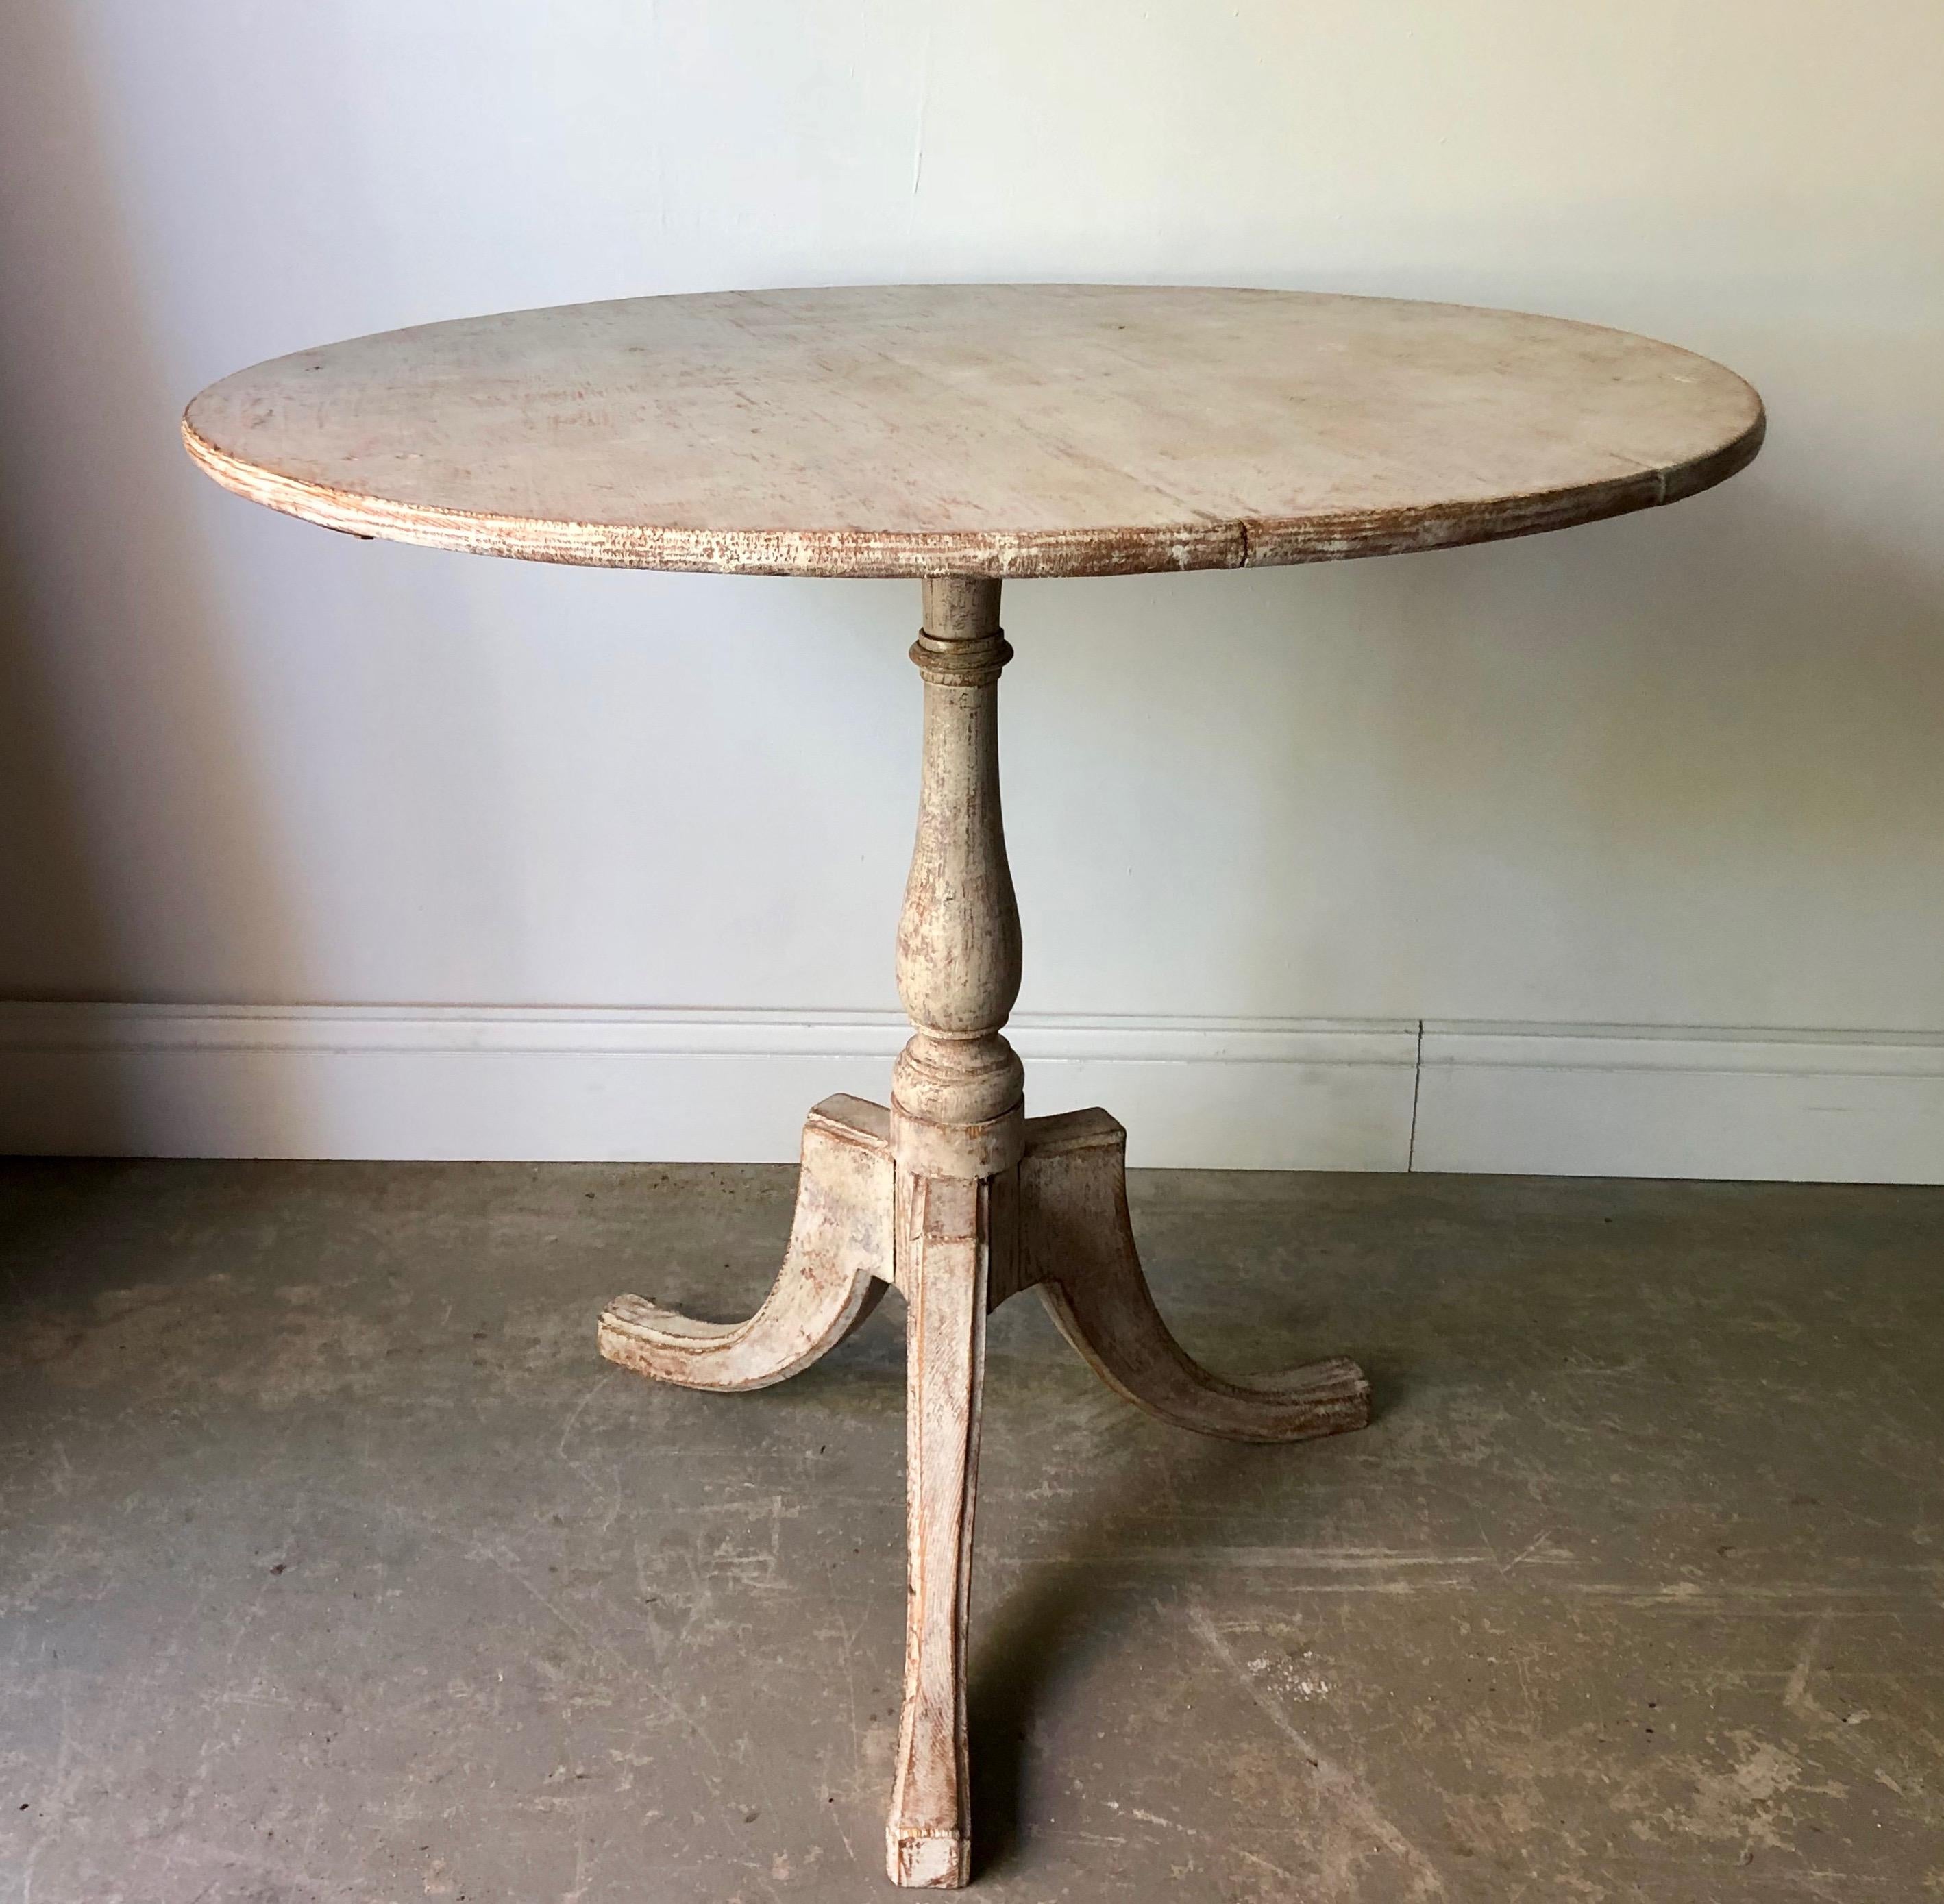 A round tilt-top pedestal table with turned base supported by beautifully carved legs. Scrape back to traces of its original color.
Stockholm, Sweden, circa 1830-1840.
More than ever, we selected the best, the rarest, the unusual, the spectacular,